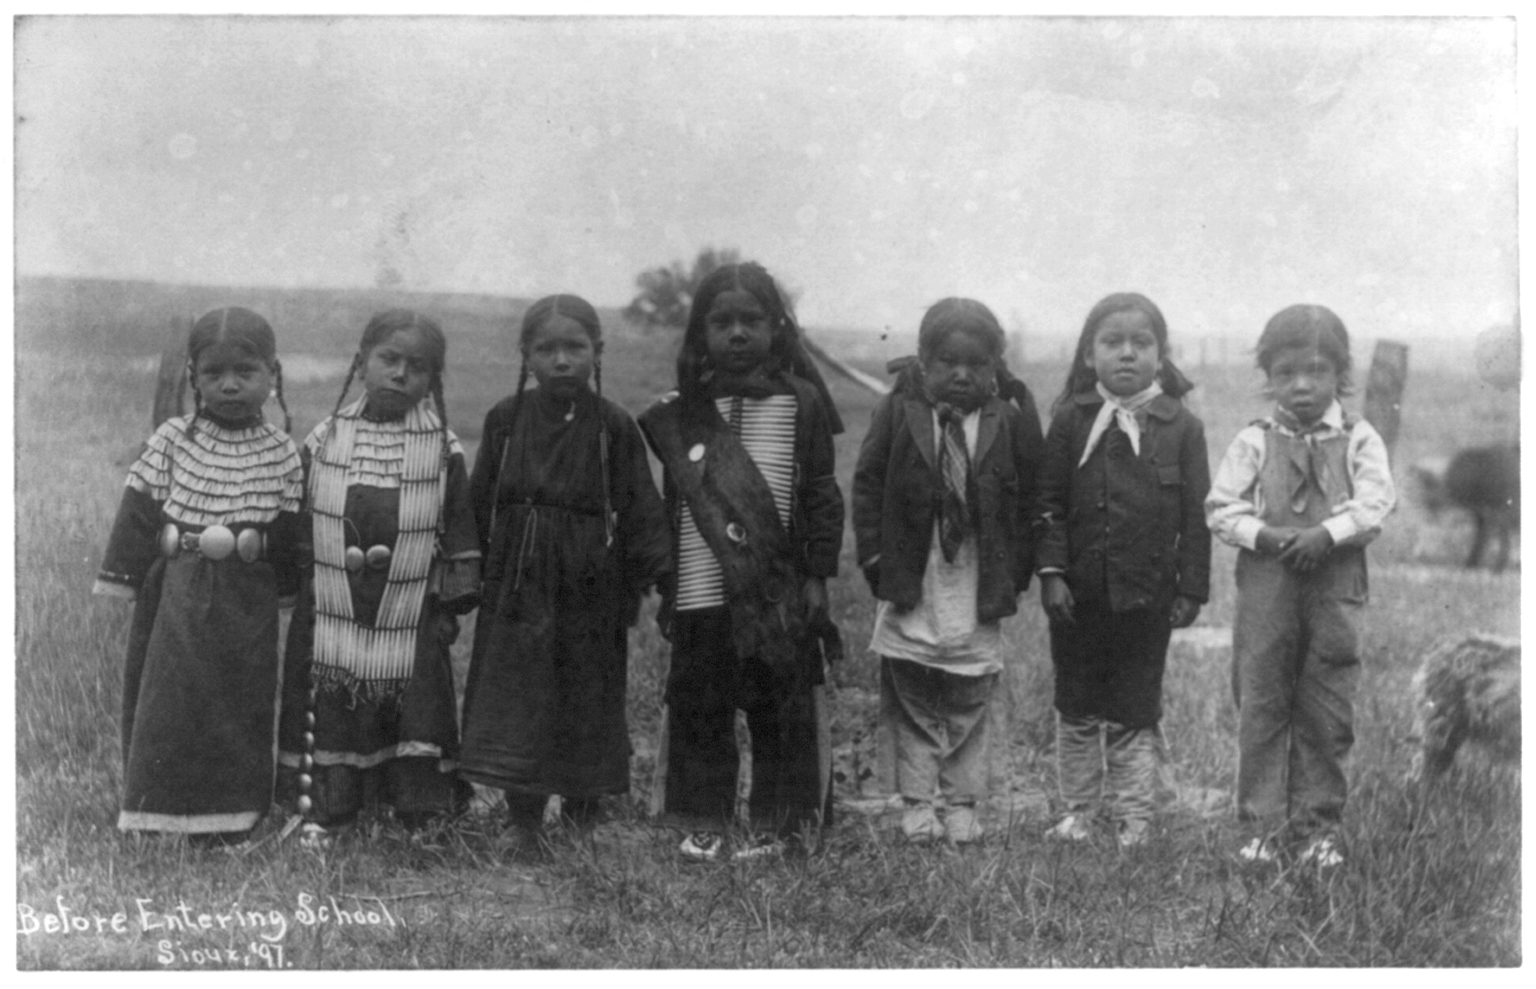 This is a black and white photograph of native children standing outside in a row.